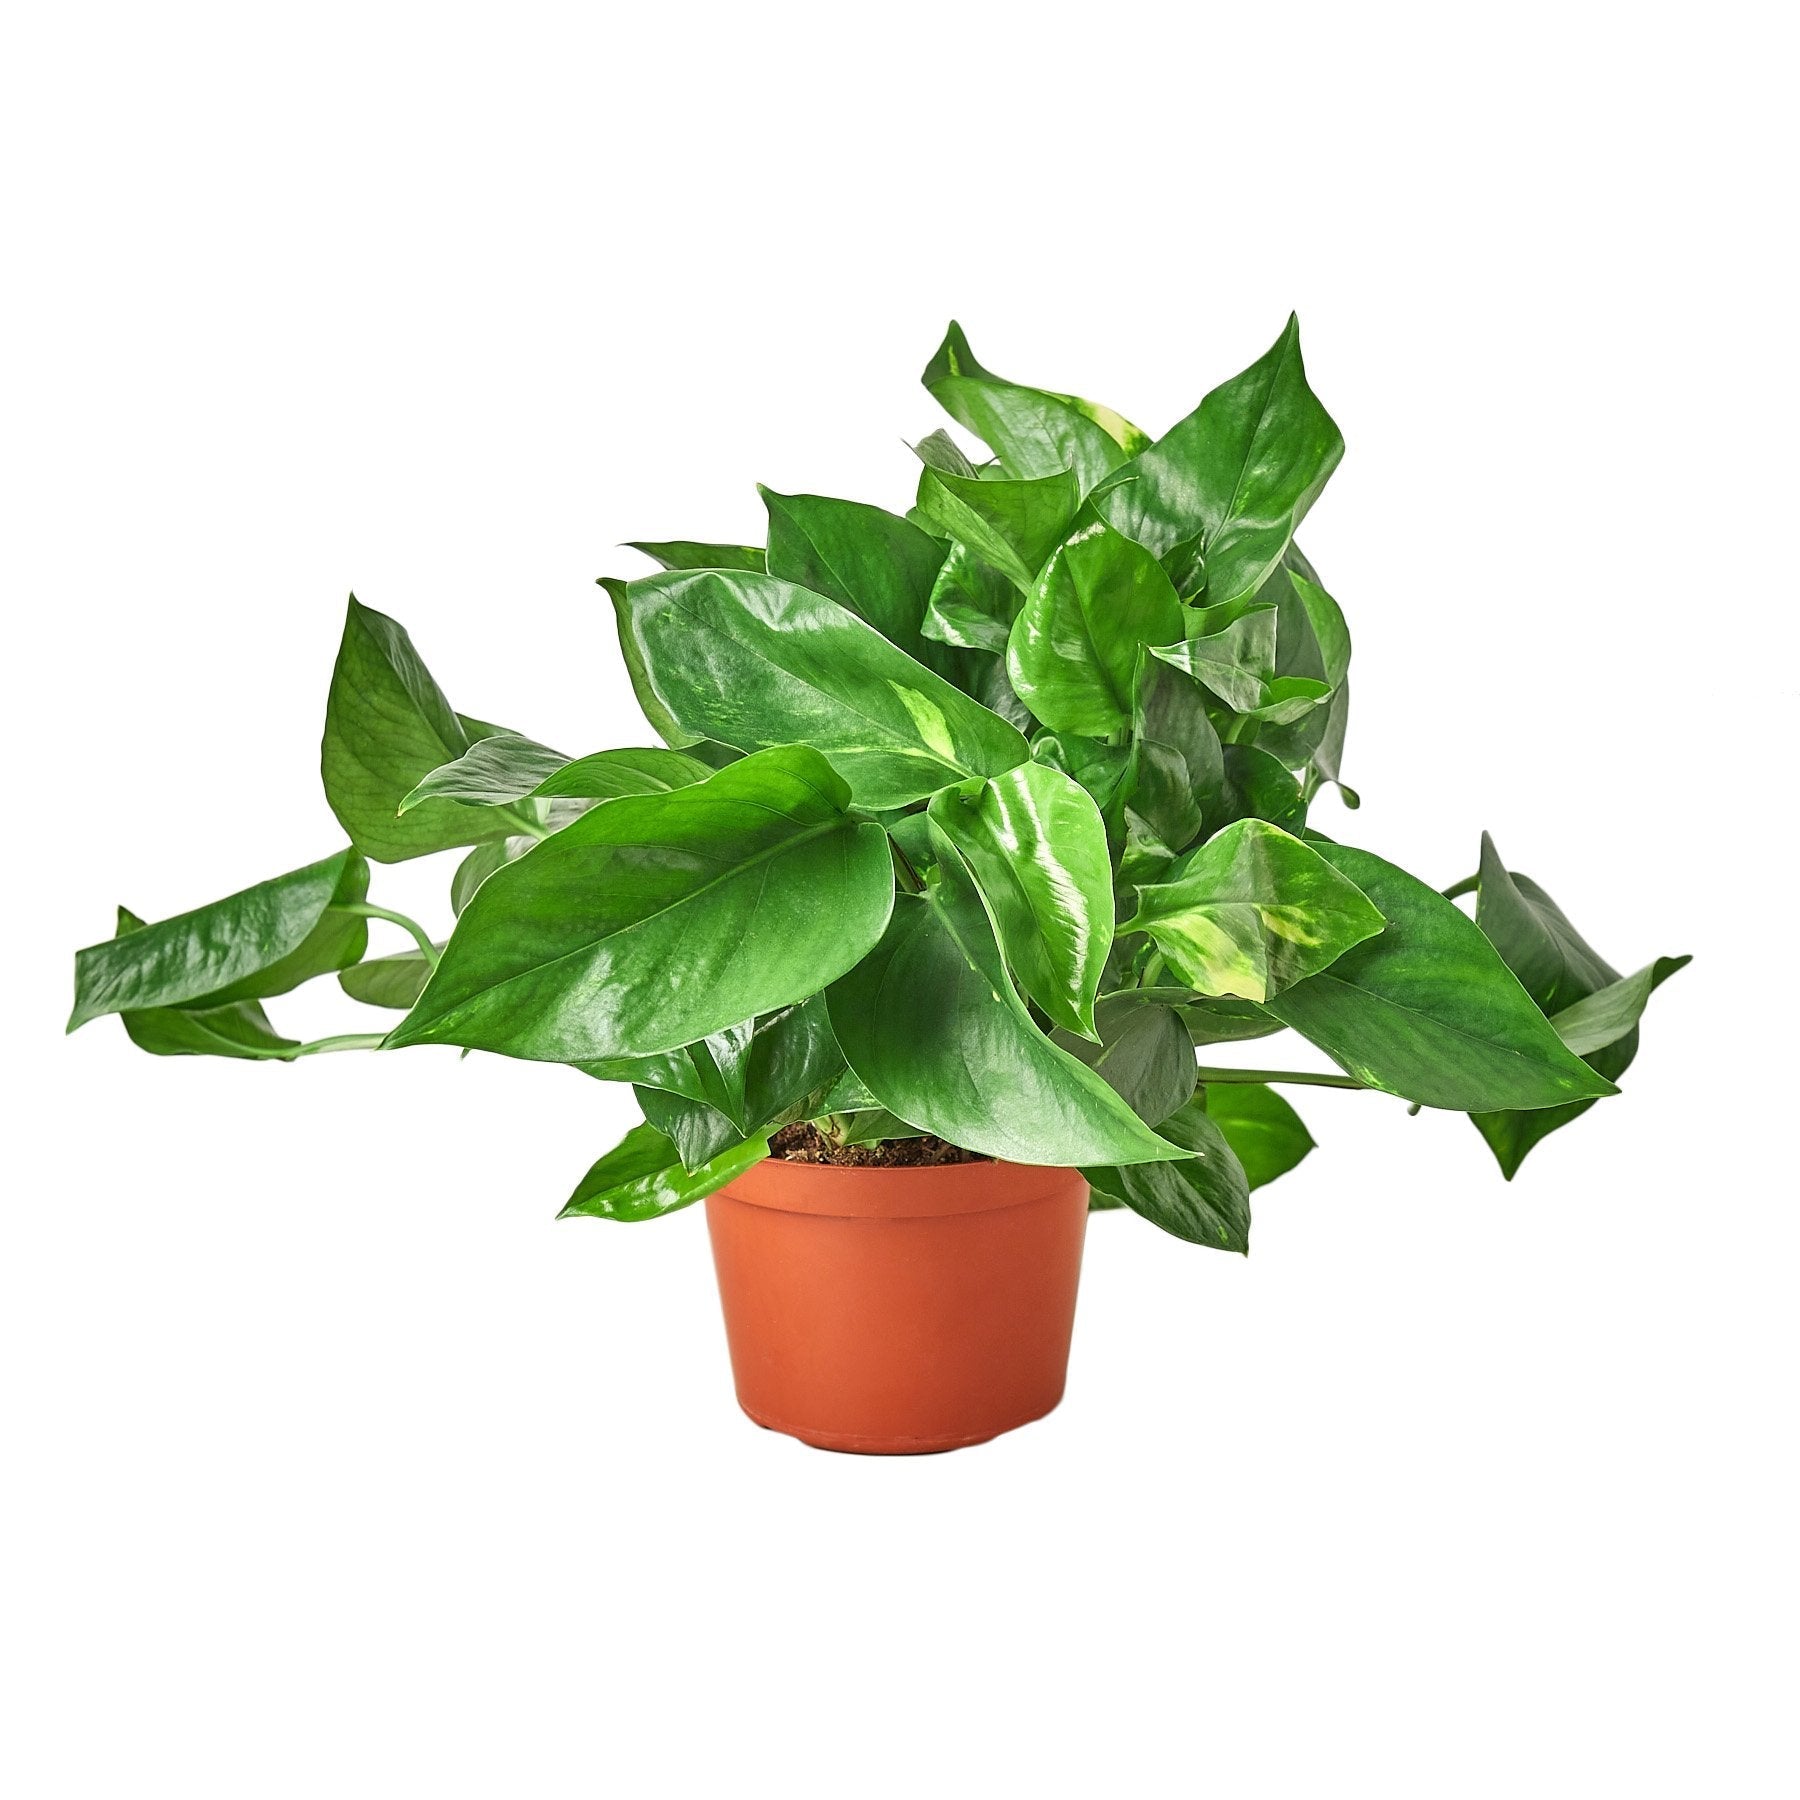 A potted plant with green leaves on a white background, available at a nursery near me.